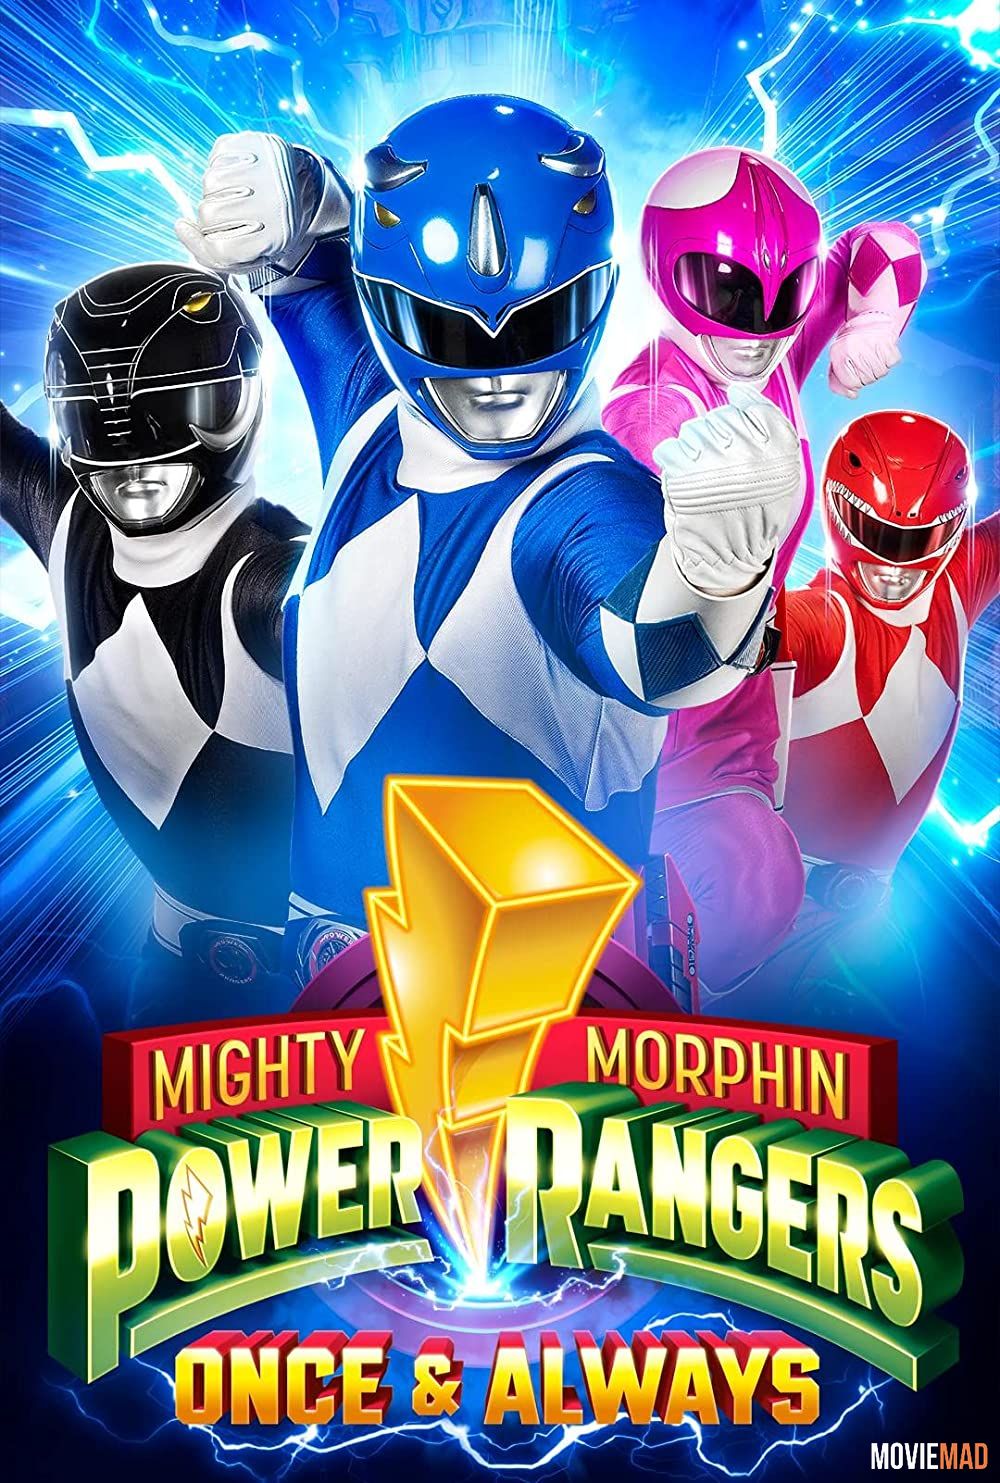 Mighty Morphin Power Rangers Once and Always (2023) Hindi Dubbed ORG HDRip Full Movie 1080p 720p 480p